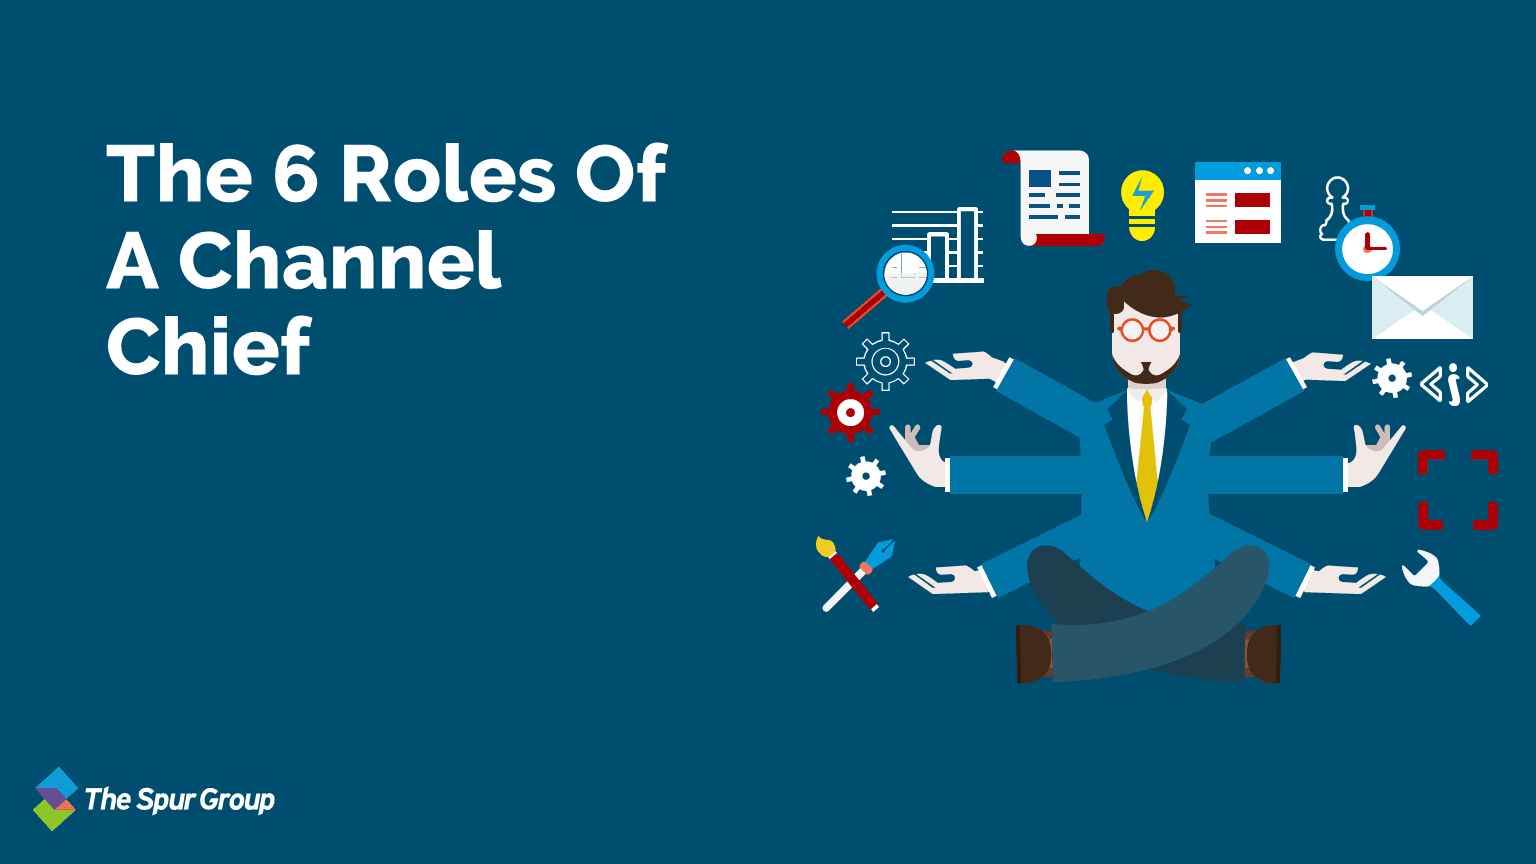 The 6 Roles Of A Channel Chief